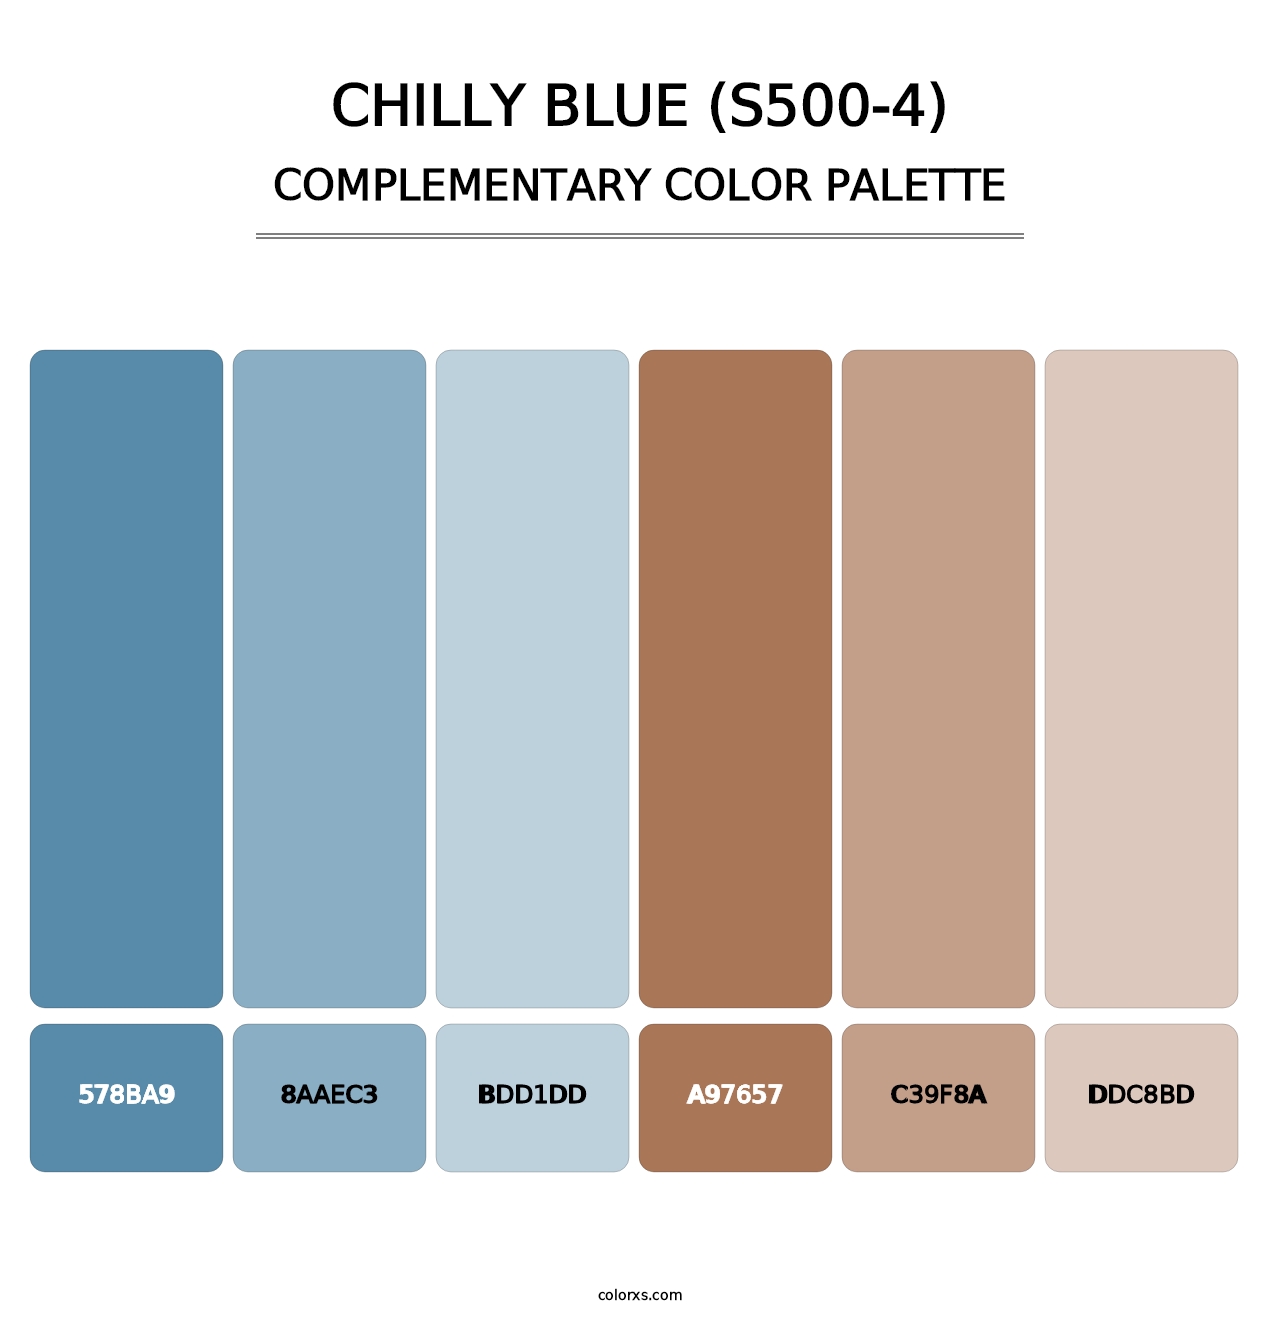 Chilly Blue (S500-4) - Complementary Color Palette